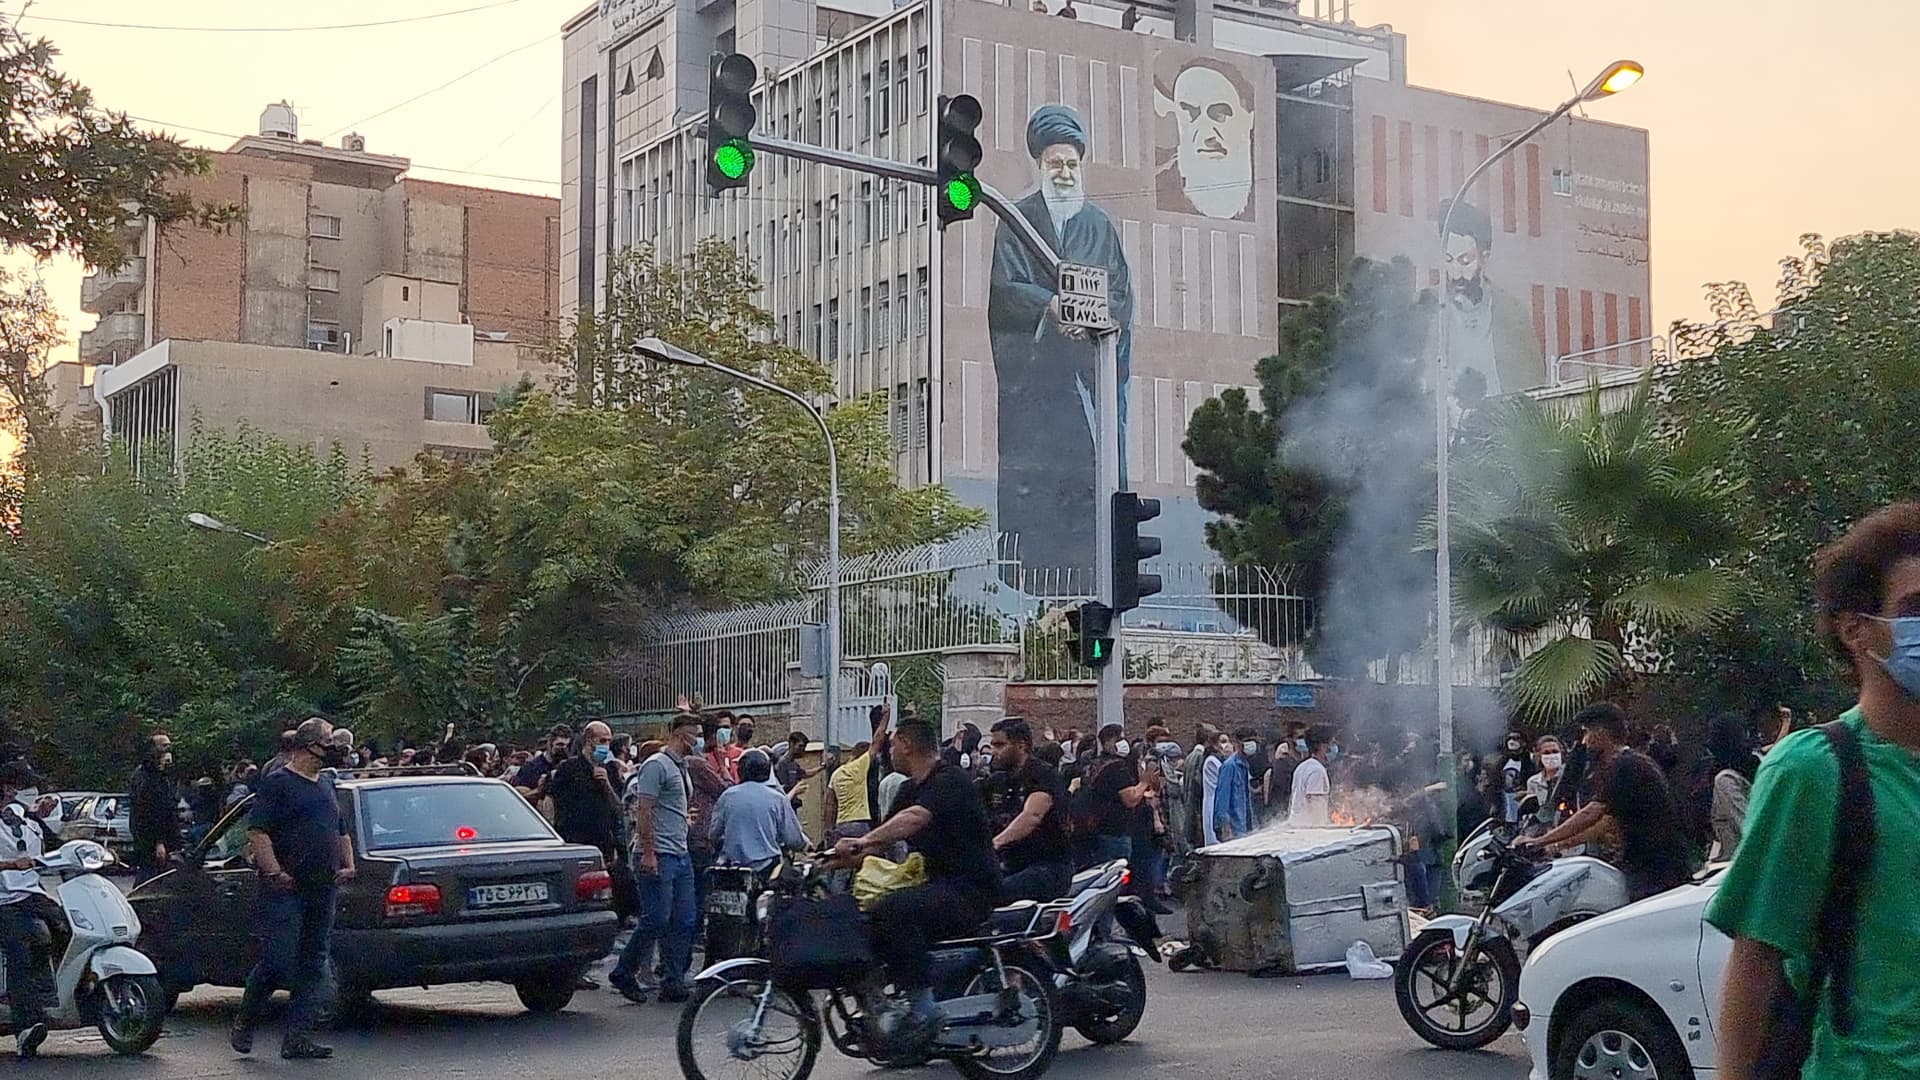 People gather in protest against the death of Mahsa Amini along the streets on September 19, 2022 in Tehran, Iran. Anti-government uprisings are to remain a sticking point and increase in frequency in Iran's political landscape as dissatisfaction with other factors like the country's economic conditions surface, according to analysts.